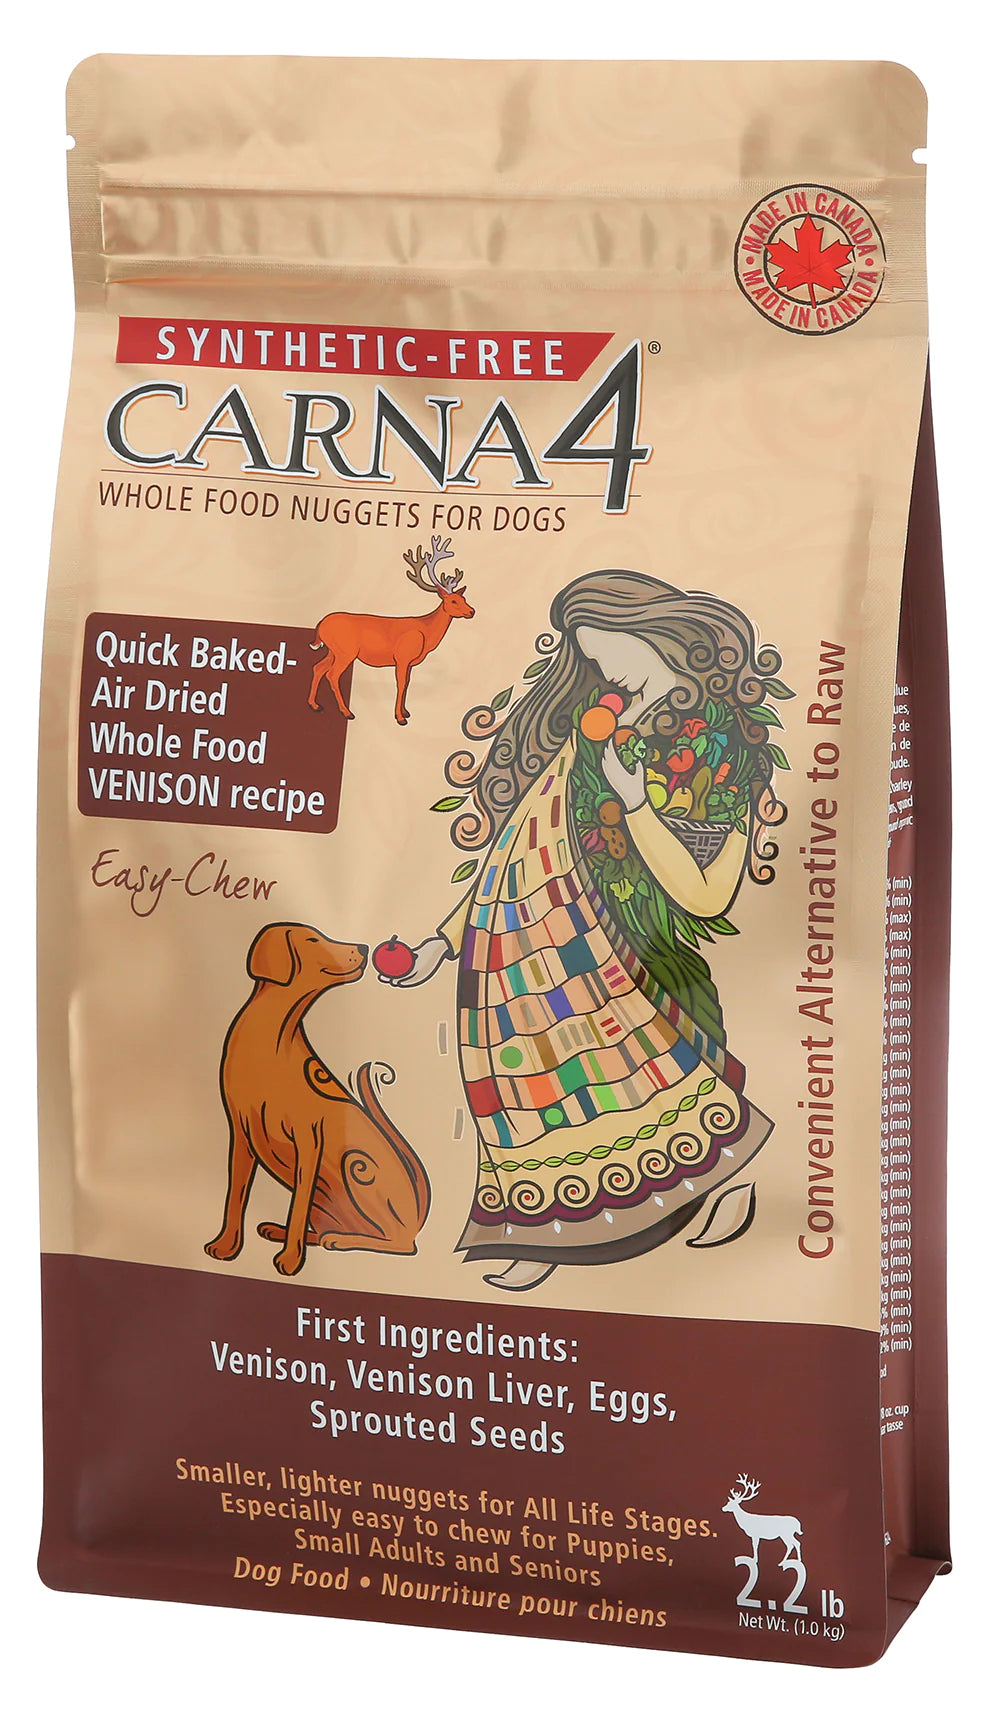 Carna4 - Quick Baked - Air Dried Whole Food Nuggets - Venison